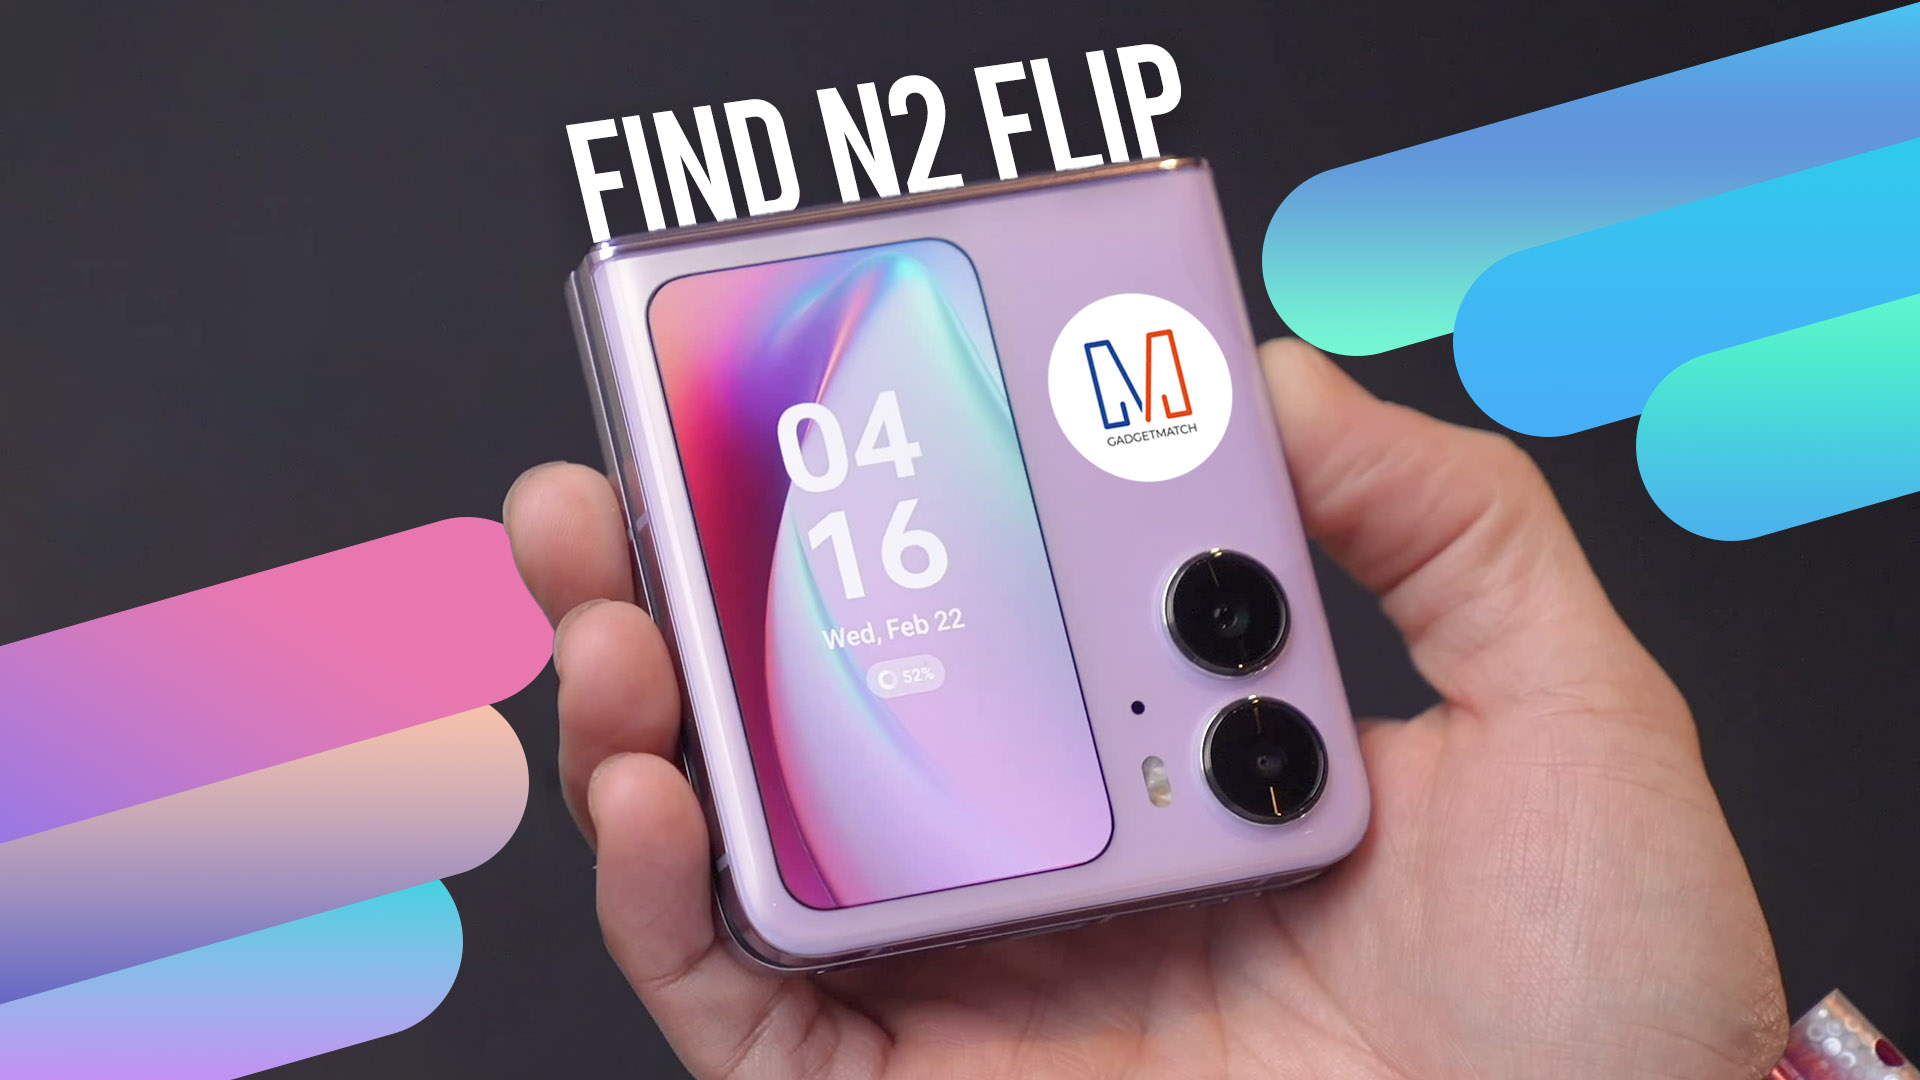 Oppo Find N2 Flip review 